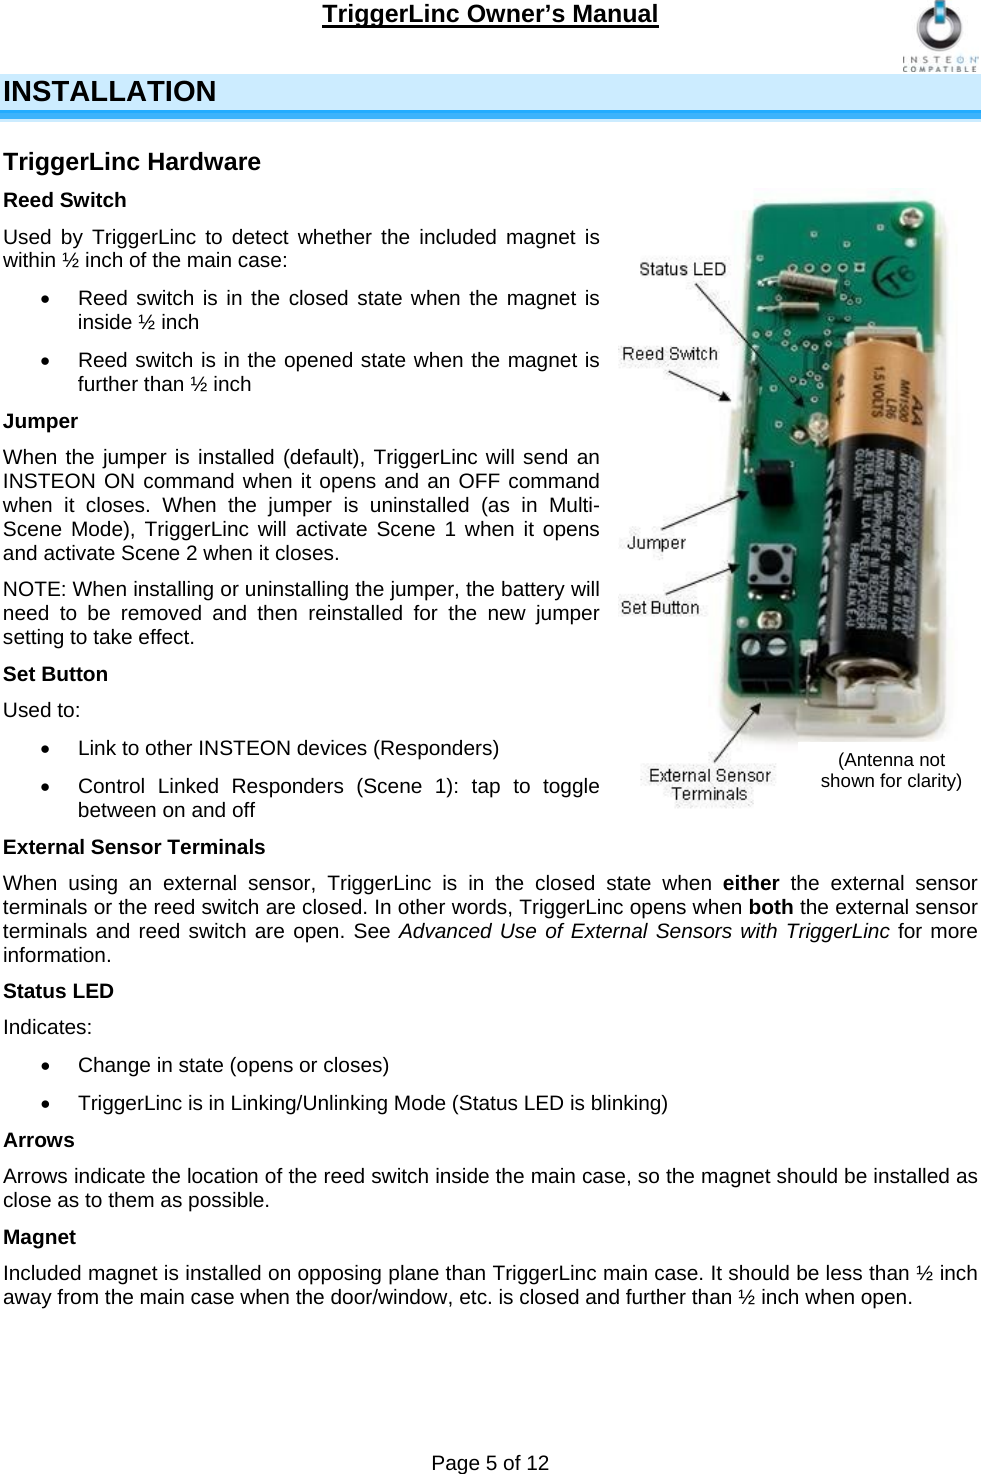 TriggerLinc Owner’s Manual   Page 5 of 12  INSTALLATION TriggerLinc Hardware Reed Switch Used by TriggerLinc to detect whether the included magnet is within ½ inch of the main case:   Reed switch is in the closed state when the magnet is inside ½ inch   Reed switch is in the opened state when the magnet is further than ½ inch  Jumper When the jumper is installed (default), TriggerLinc will send an INSTEON ON command when it opens and an OFF command when it closes. When the jumper is uninstalled (as in Multi-Scene Mode), TriggerLinc will activate Scene 1 when it opens and activate Scene 2 when it closes.  NOTE: When installing or uninstalling the jumper, the battery will need to be removed and then reinstalled for the new jumper setting to take effect.  Set Button Used to:   Link to other INSTEON devices (Responders)   Control Linked Responders (Scene 1): tap to toggle between on and off External Sensor Terminals When using an external sensor, TriggerLinc is in the closed state when either  the external sensor terminals or the reed switch are closed. In other words, TriggerLinc opens when both the external sensor terminals and reed switch are open. See Advanced Use of External Sensors with TriggerLinc for more information. Status LED Indicates:   Change in state (opens or closes)   TriggerLinc is in Linking/Unlinking Mode (Status LED is blinking)  Arrows Arrows indicate the location of the reed switch inside the main case, so the magnet should be installed as close as to them as possible. Magnet Included magnet is installed on opposing plane than TriggerLinc main case. It should be less than ½ inch away from the main case when the door/window, etc. is closed and further than ½ inch when open.  (Antenna not shown for clarity) 